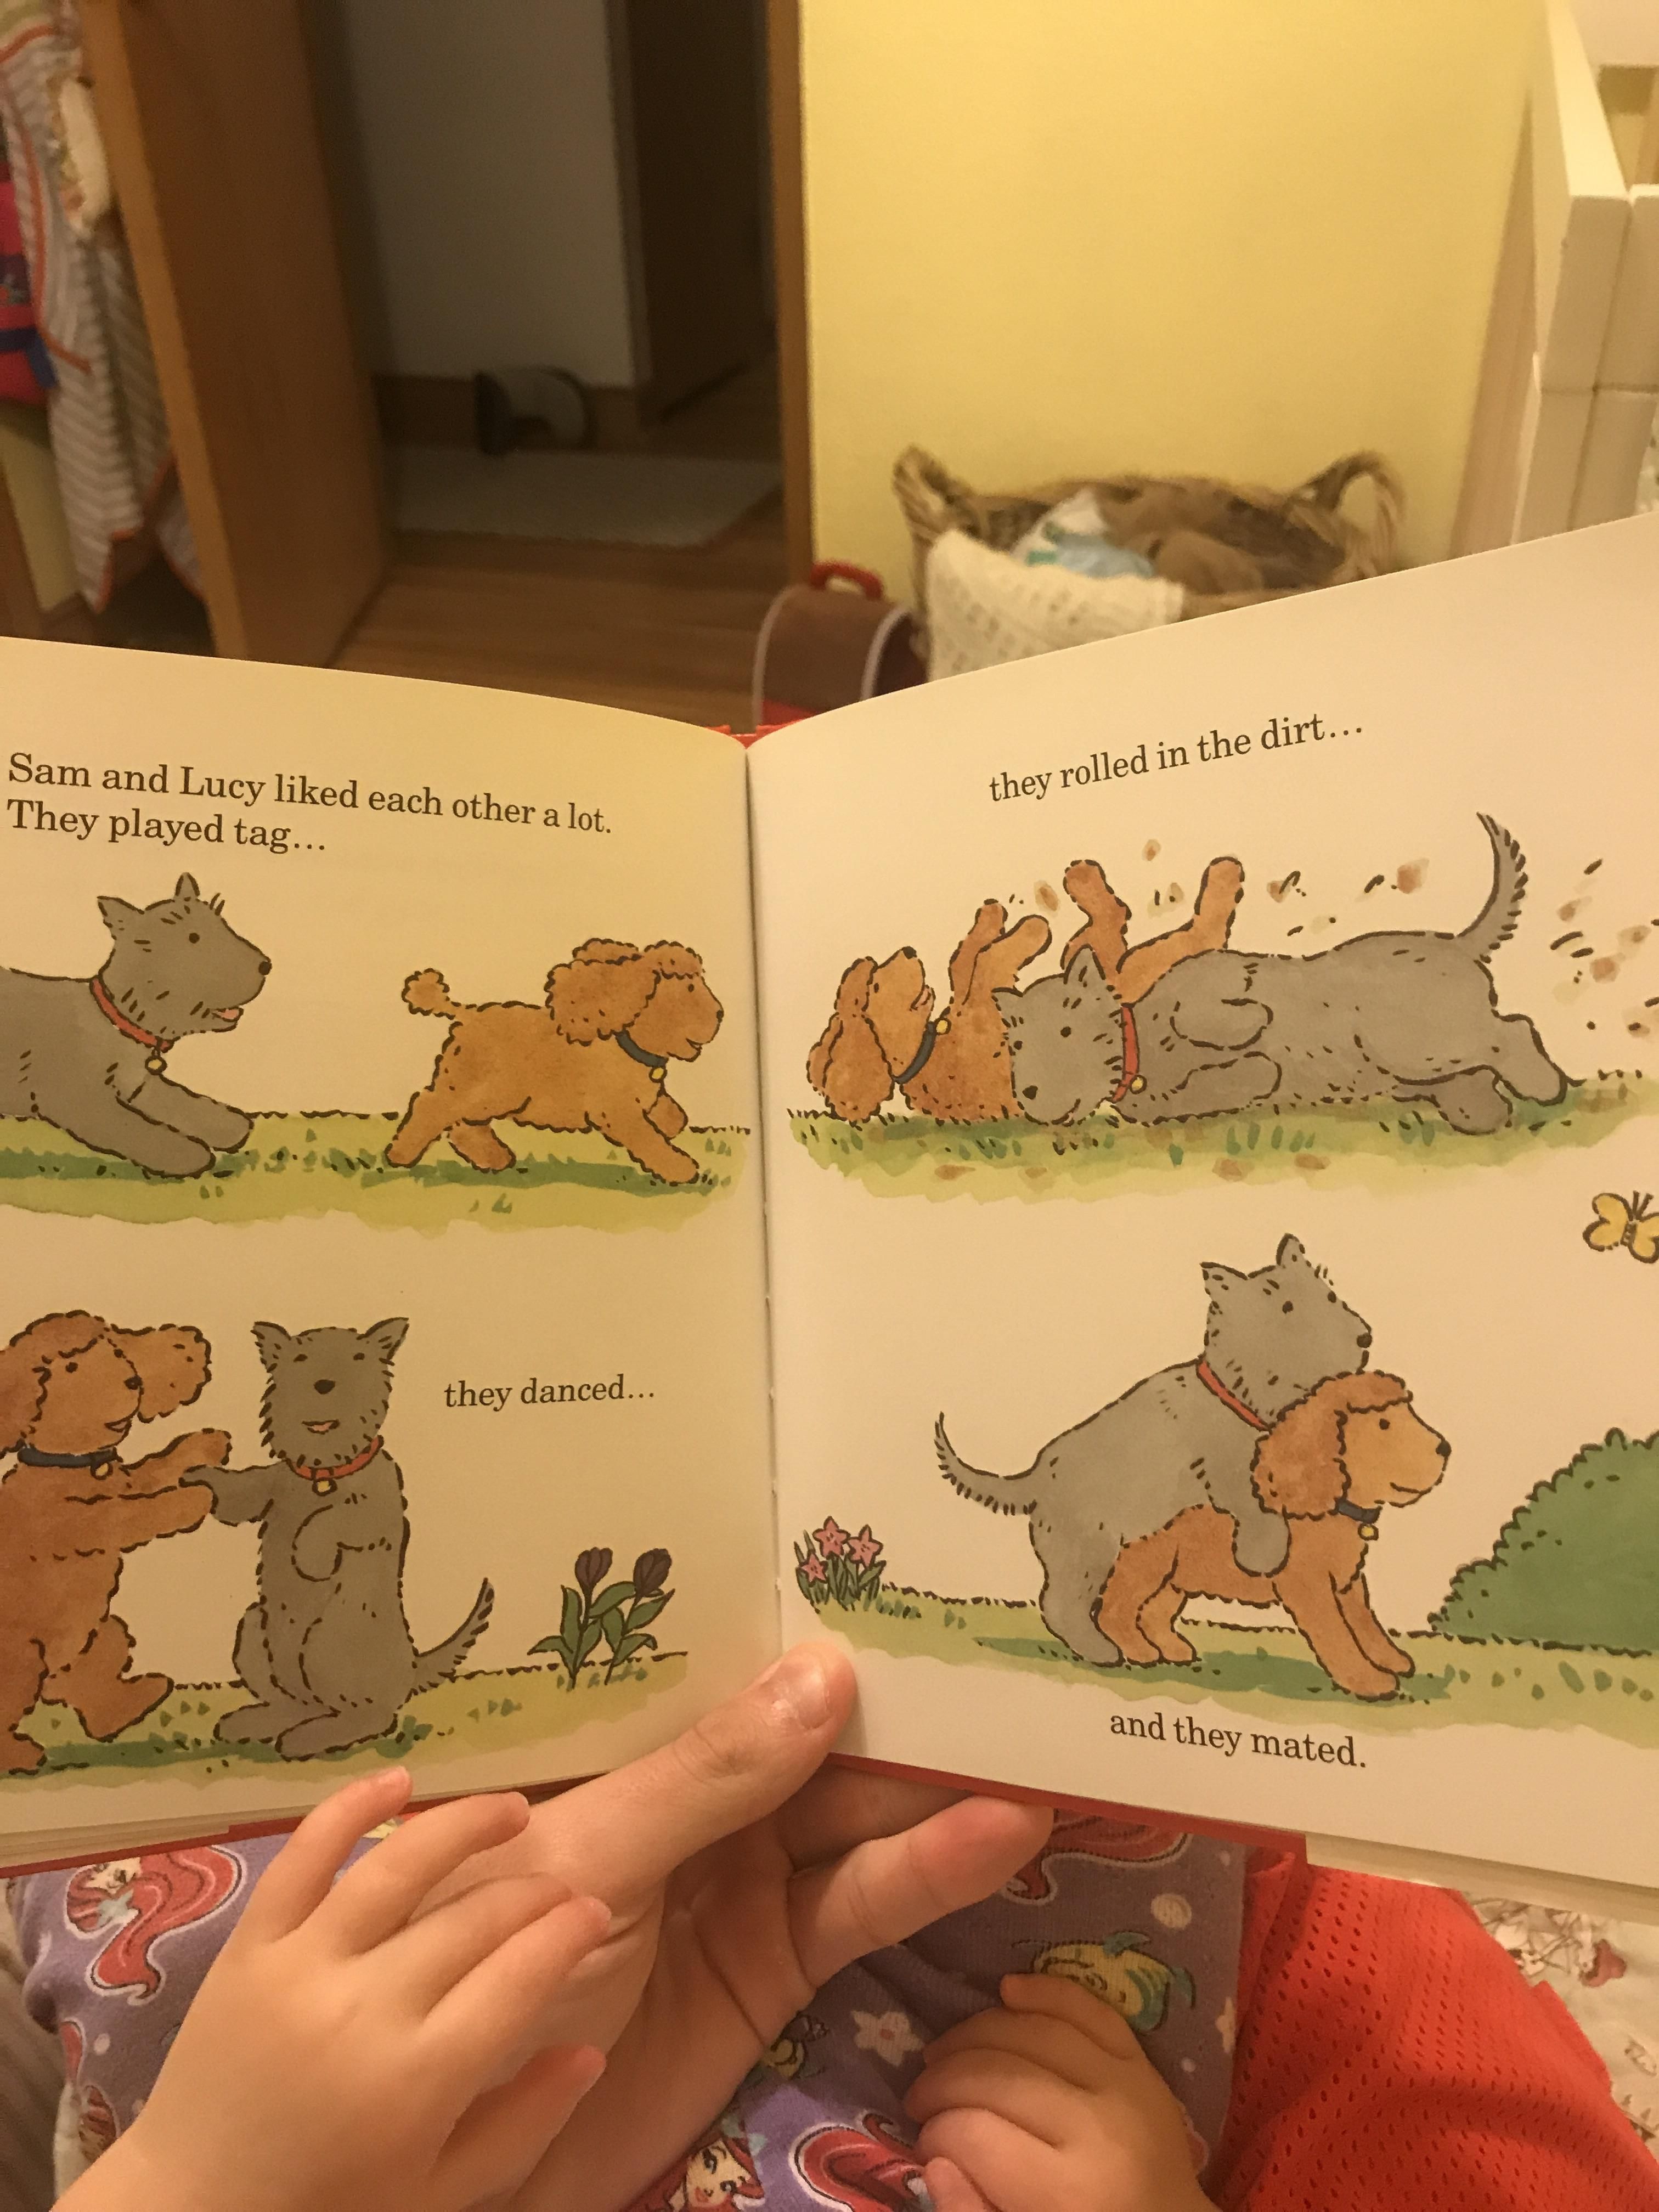 That escalated quickly for a children's book...